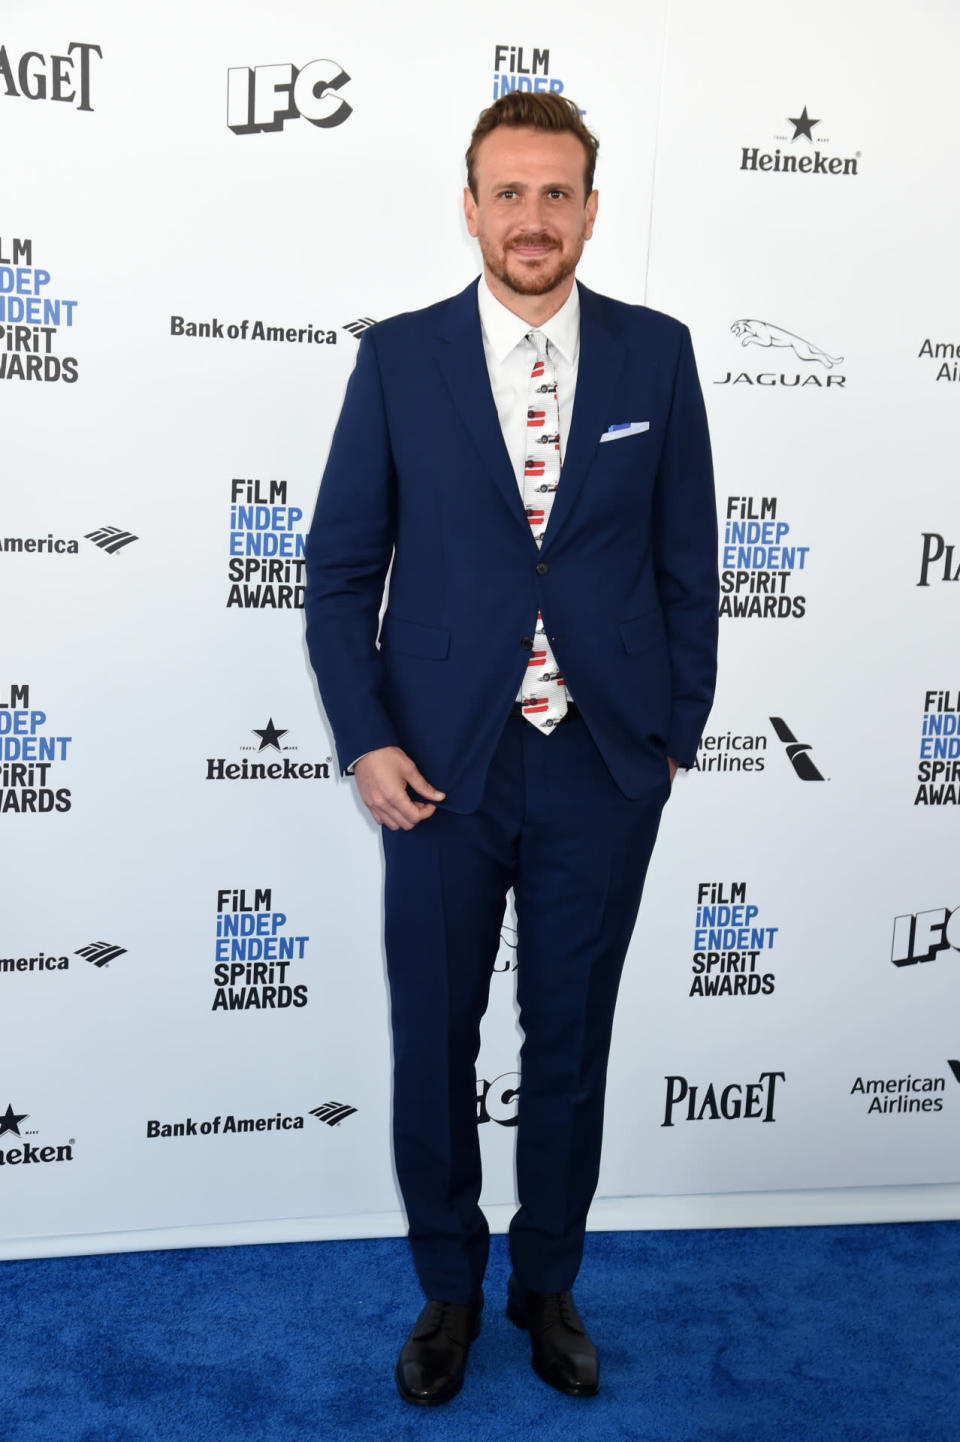 Jason Segel in a blue suit at the Film Independent Spirit Awards on Feb. 27, 2016.